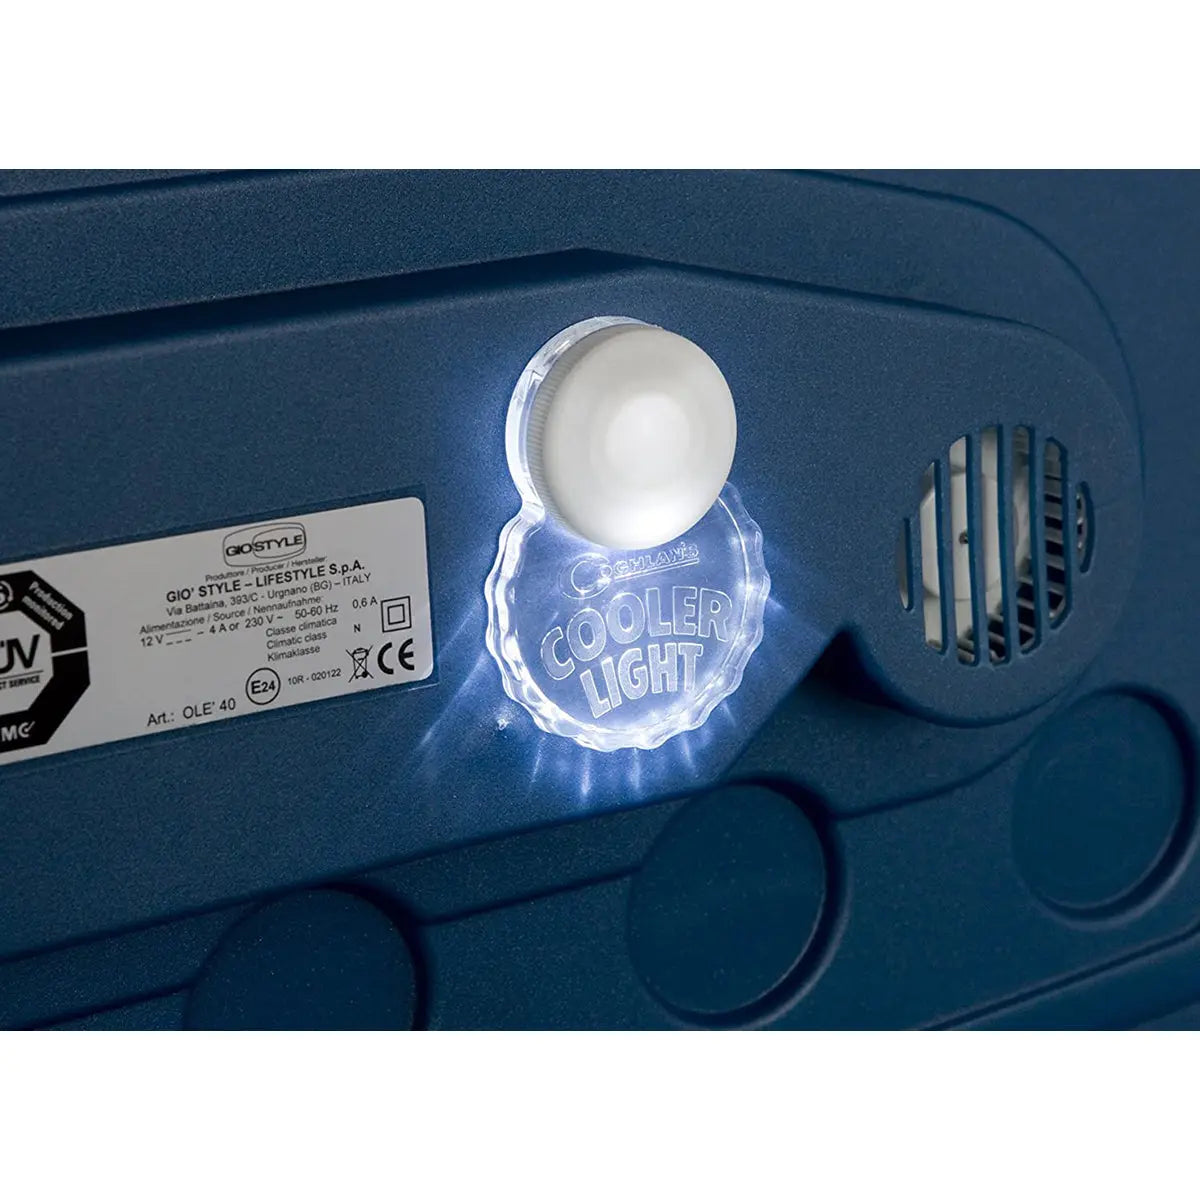 Coghlan's Cooler Light LED Auto-On Lamp for Toolbox Ice Chest Tacklebox Fishing Coghlan's